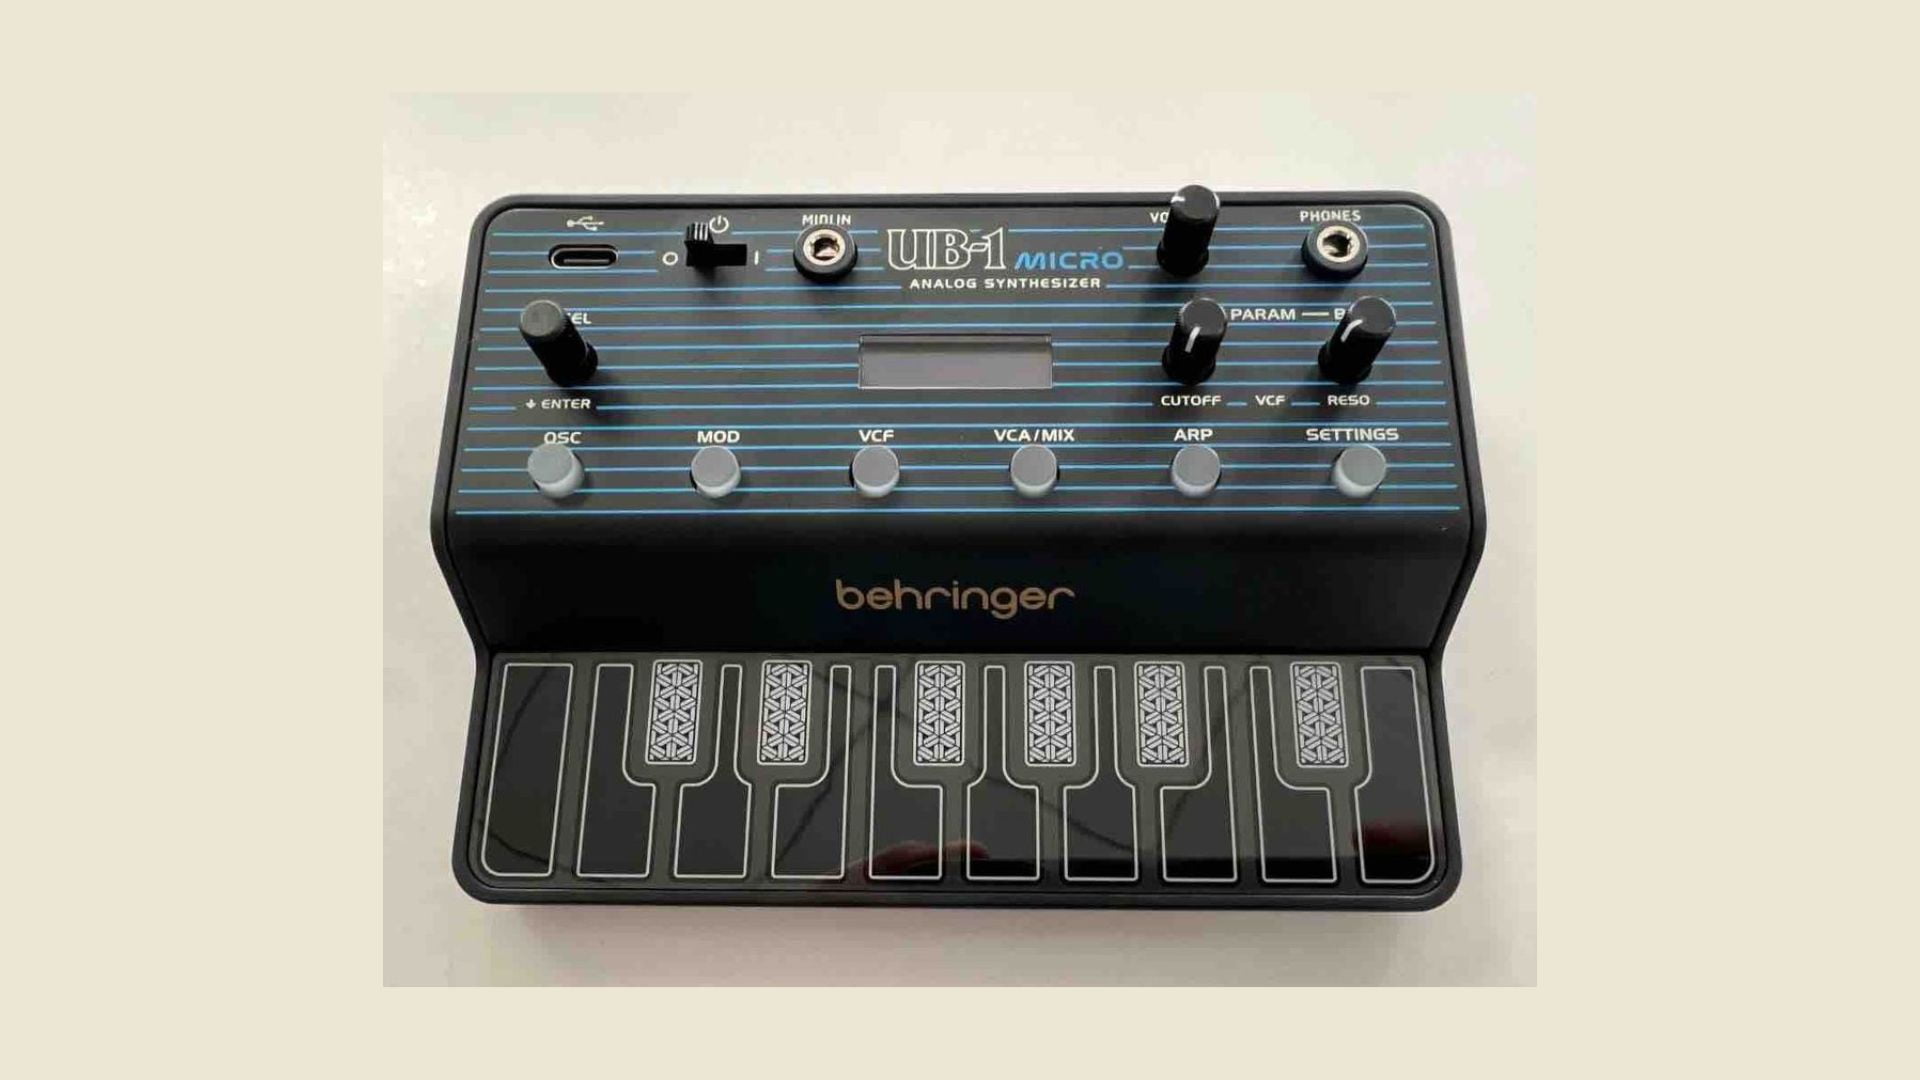 Behringer UB-1 Micro: A $49 Pocket-Sized Analog Synth